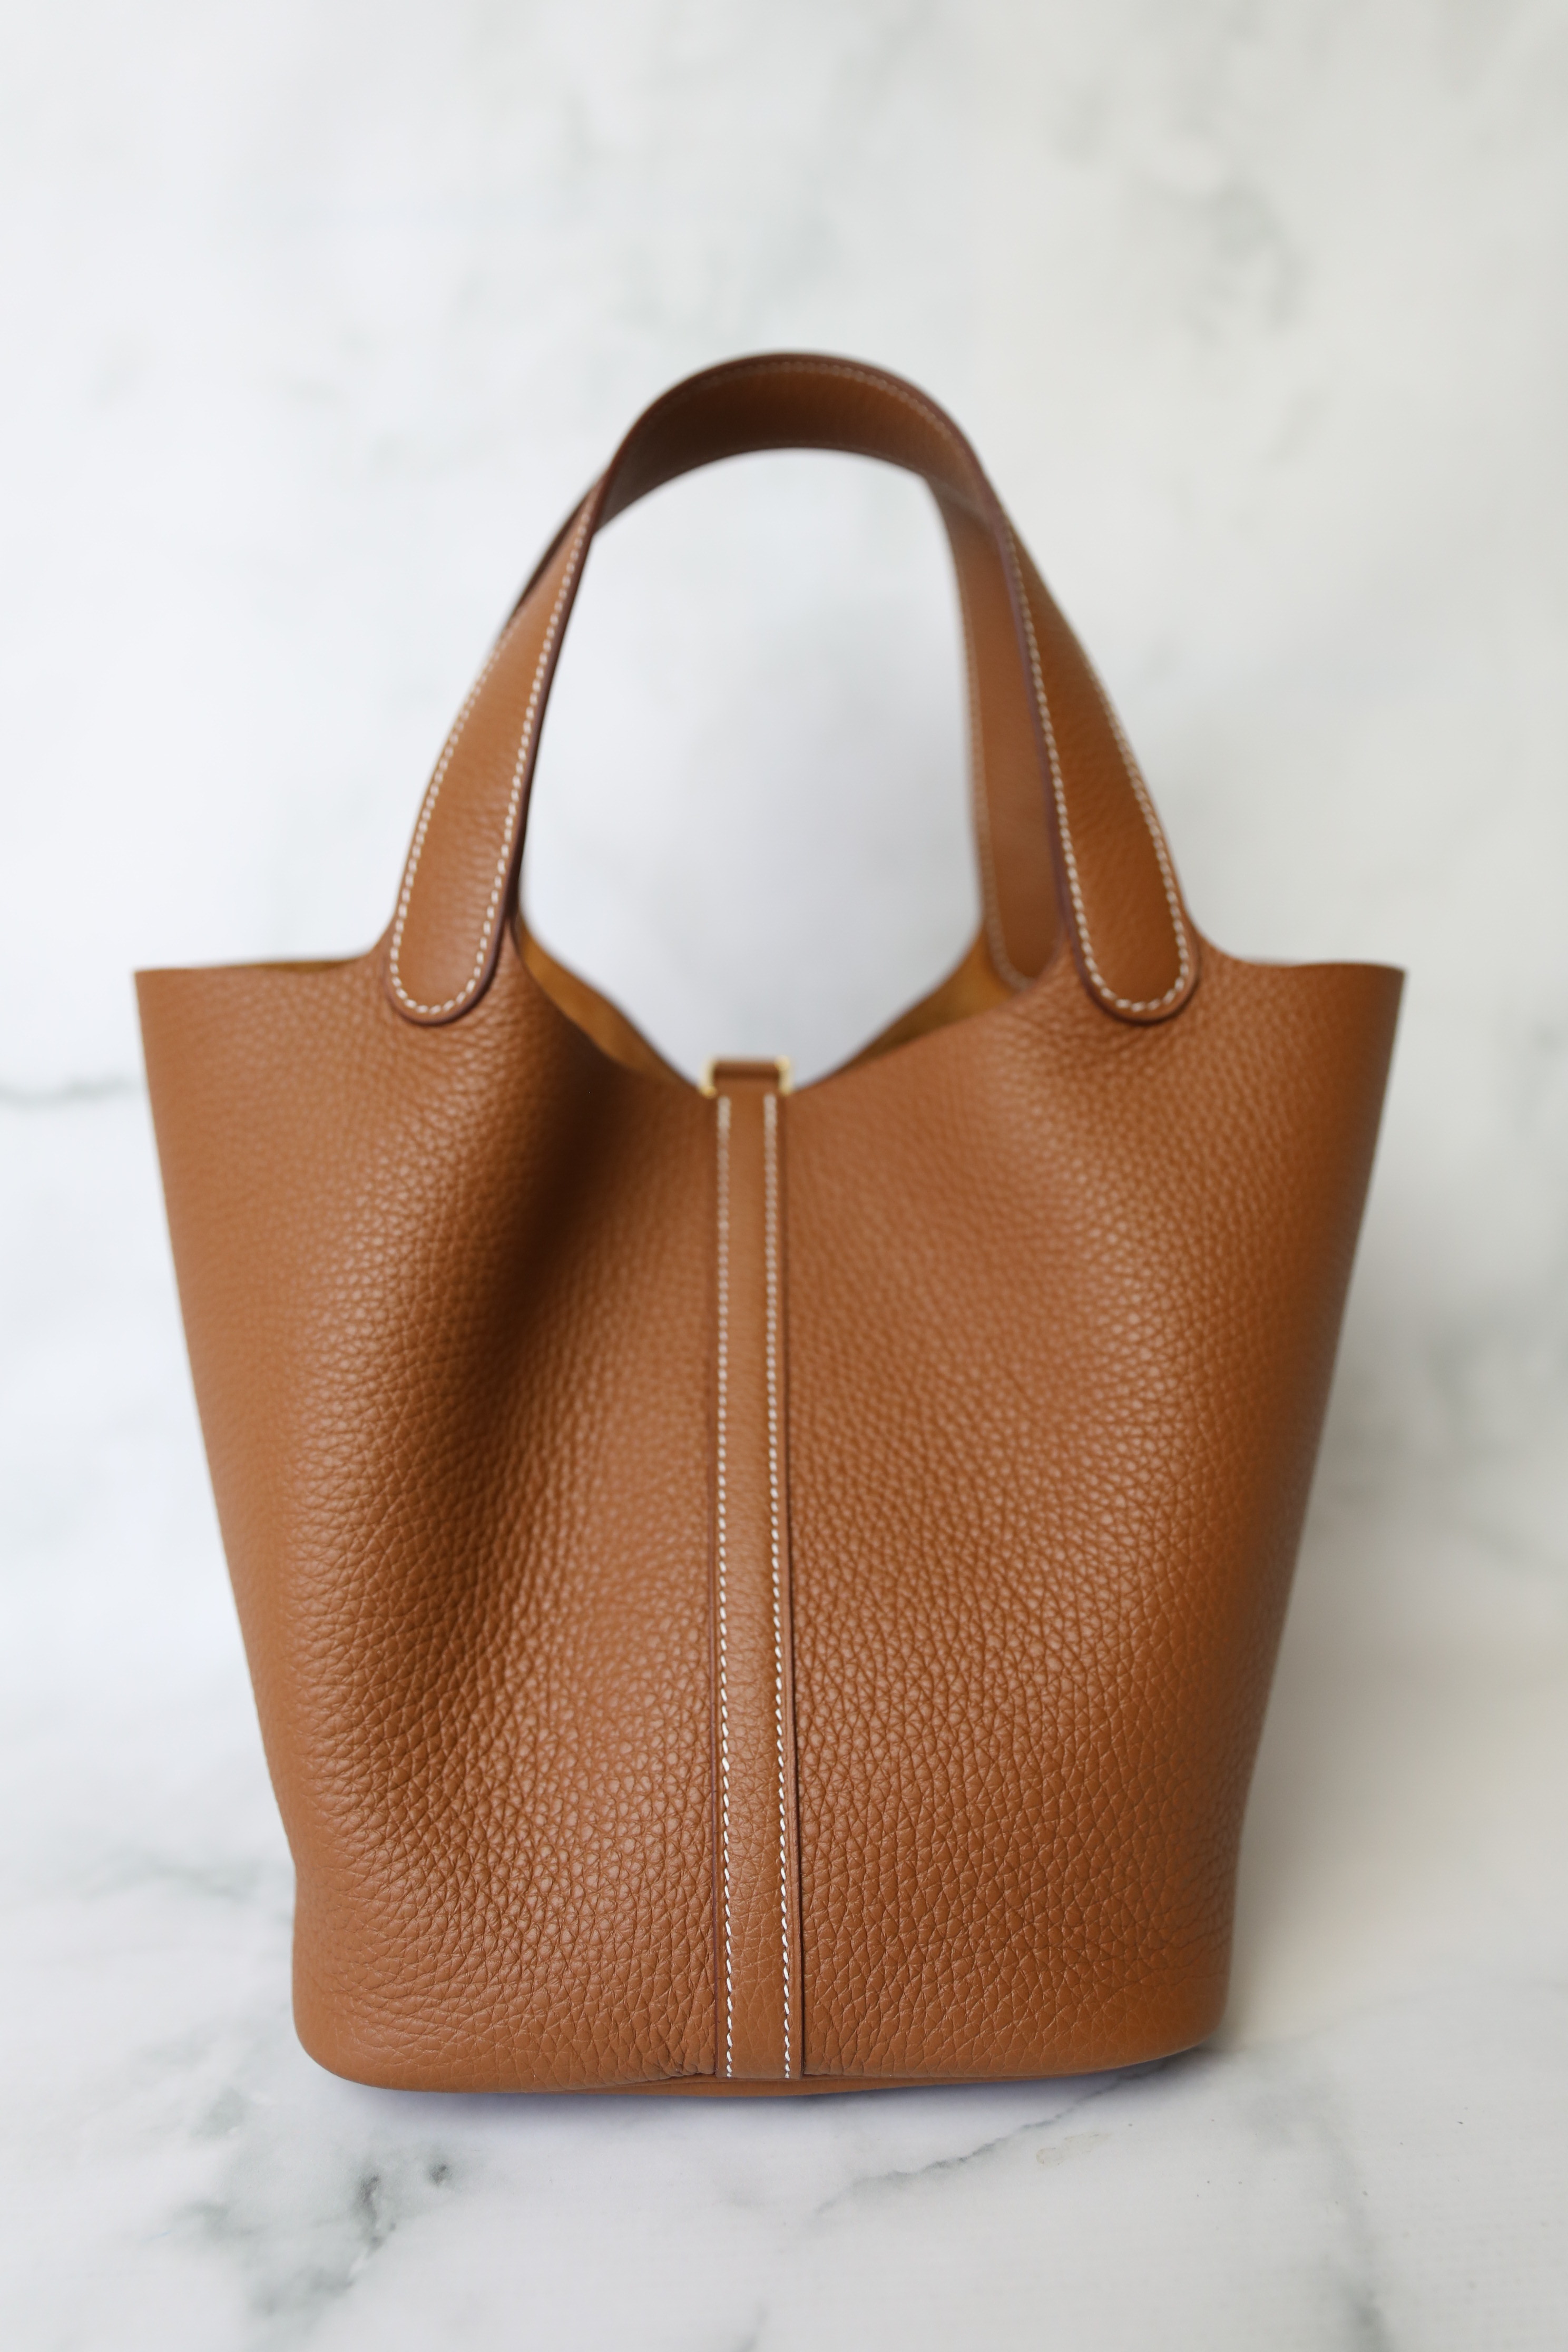 Hermes Picotin 22, Craie Leather with Gold Hardware, Preowned in Box WA001  - Julia Rose Boston